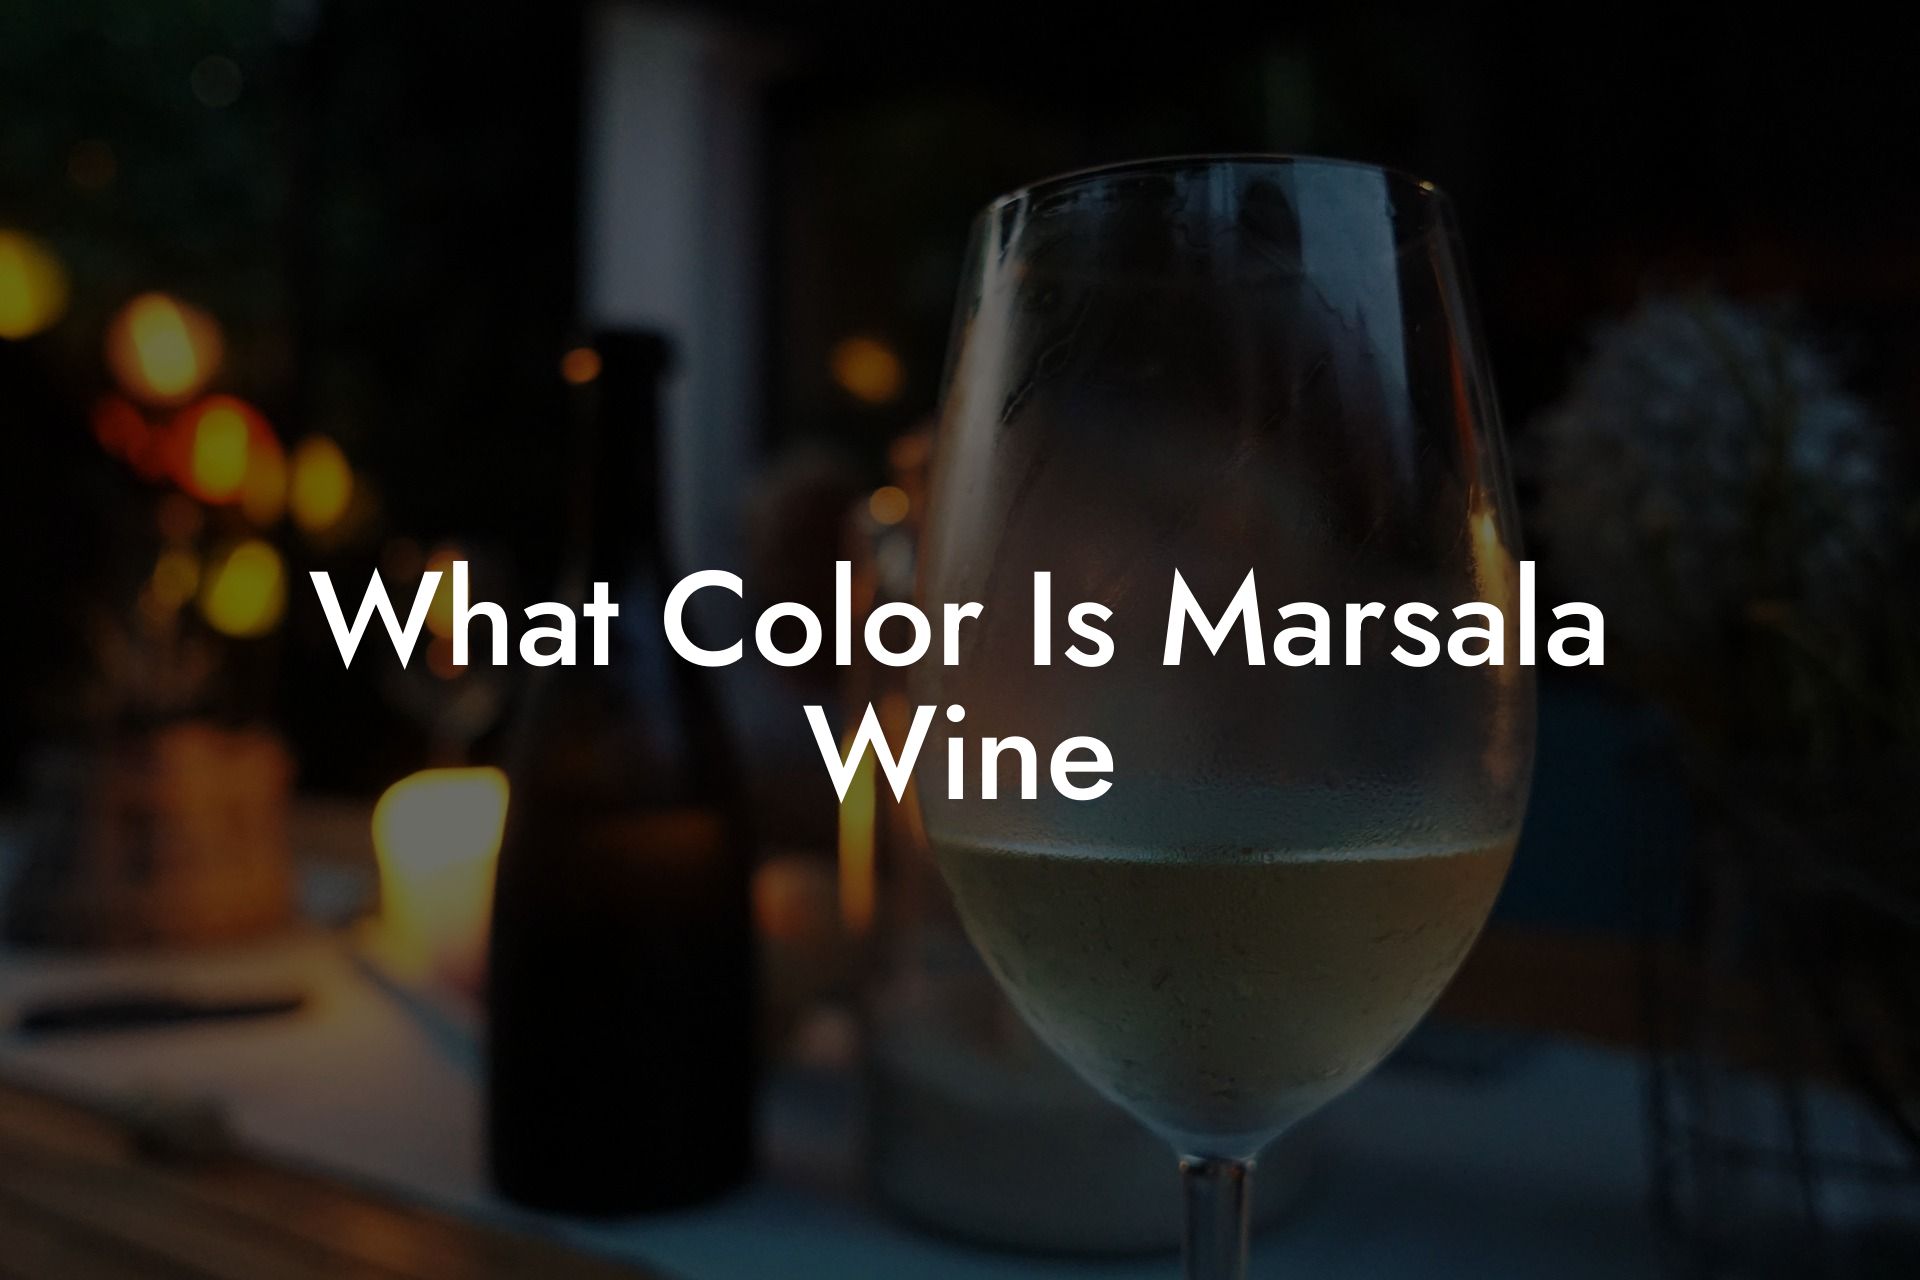 What Color Is Marsala Wine